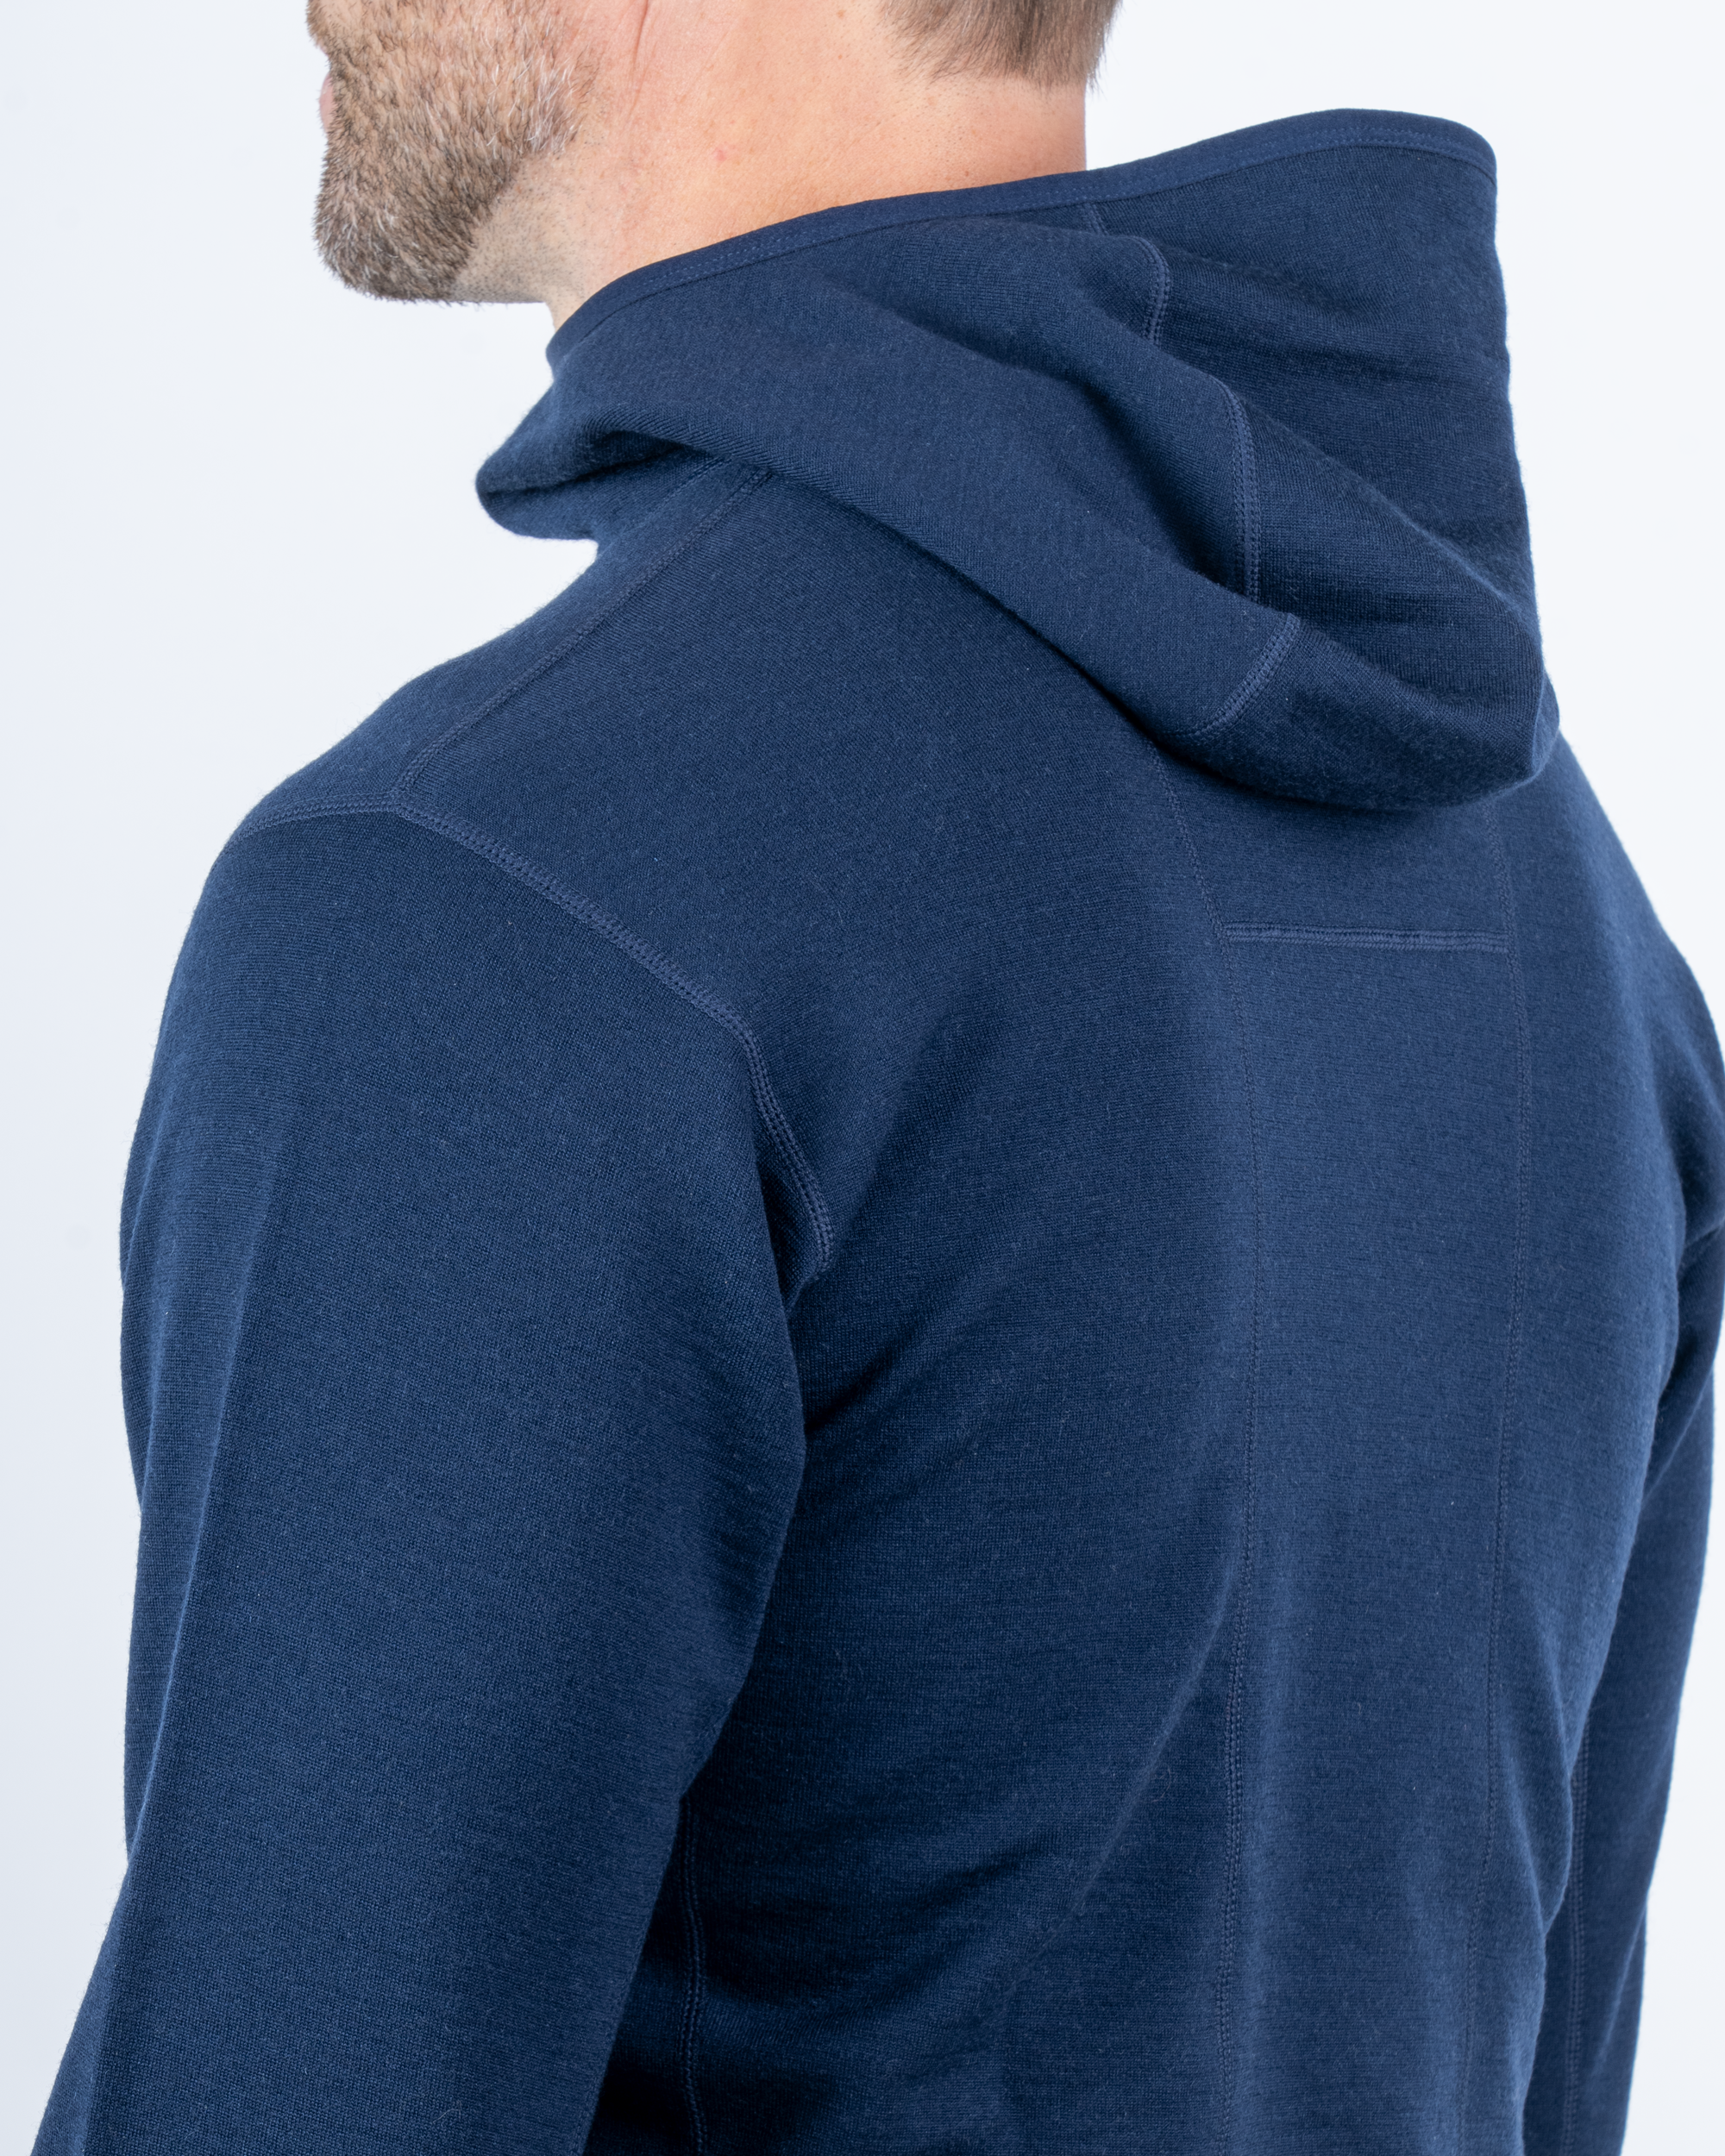 Foreign Rider Co Nuyarn Merino Wool Navy Hooded Jacket Back Shoulder and Hood Detail